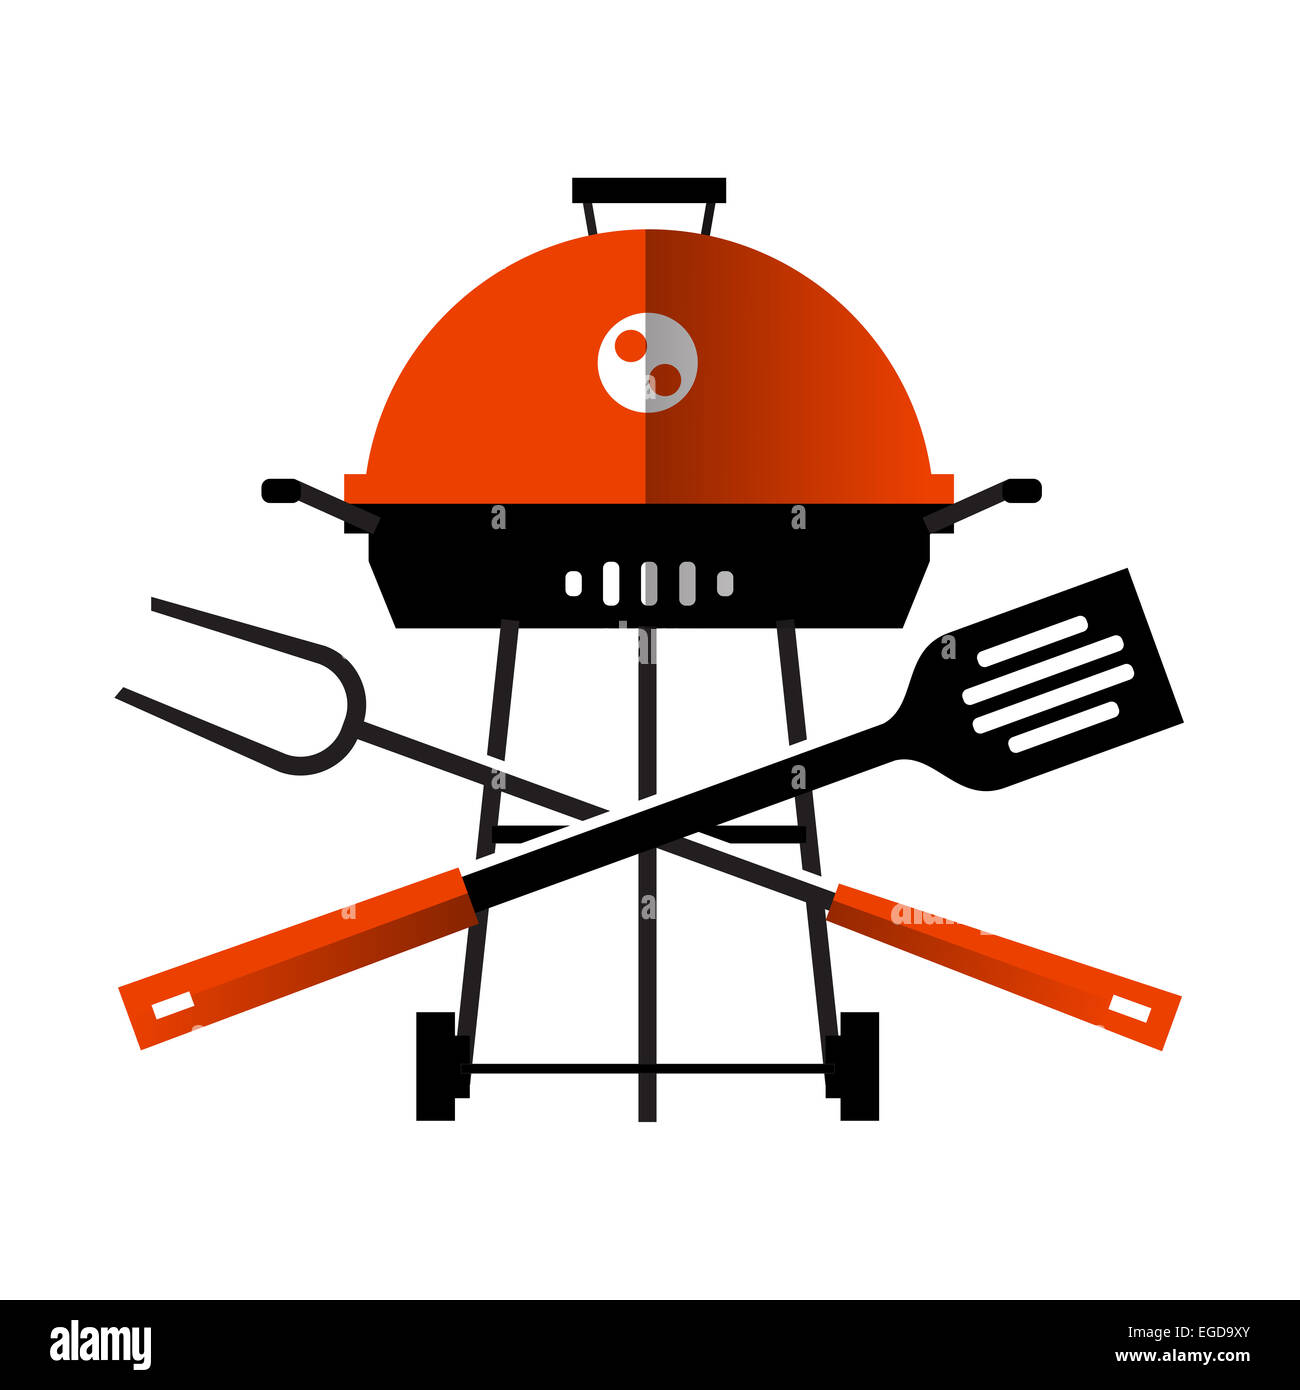 grill, barbecue, barbeque. utensils for BBQ on white background Stock Photo